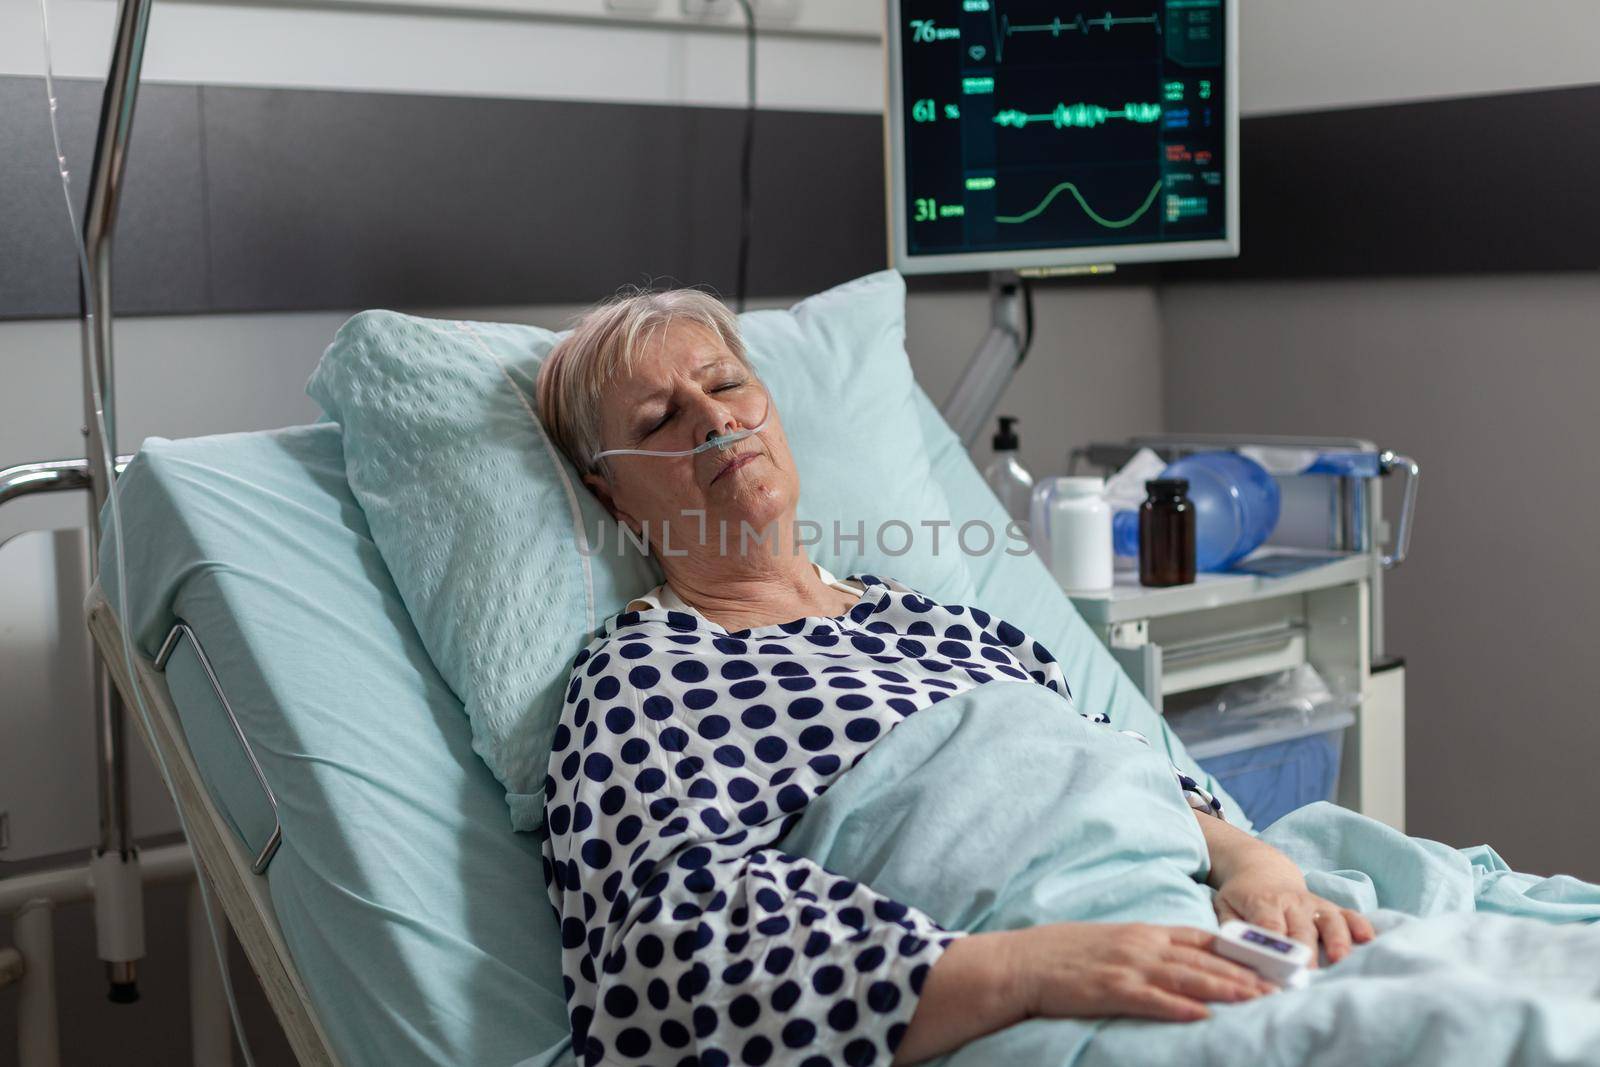 Elderly patient following recovery treatment laying in hospital bed by DCStudio